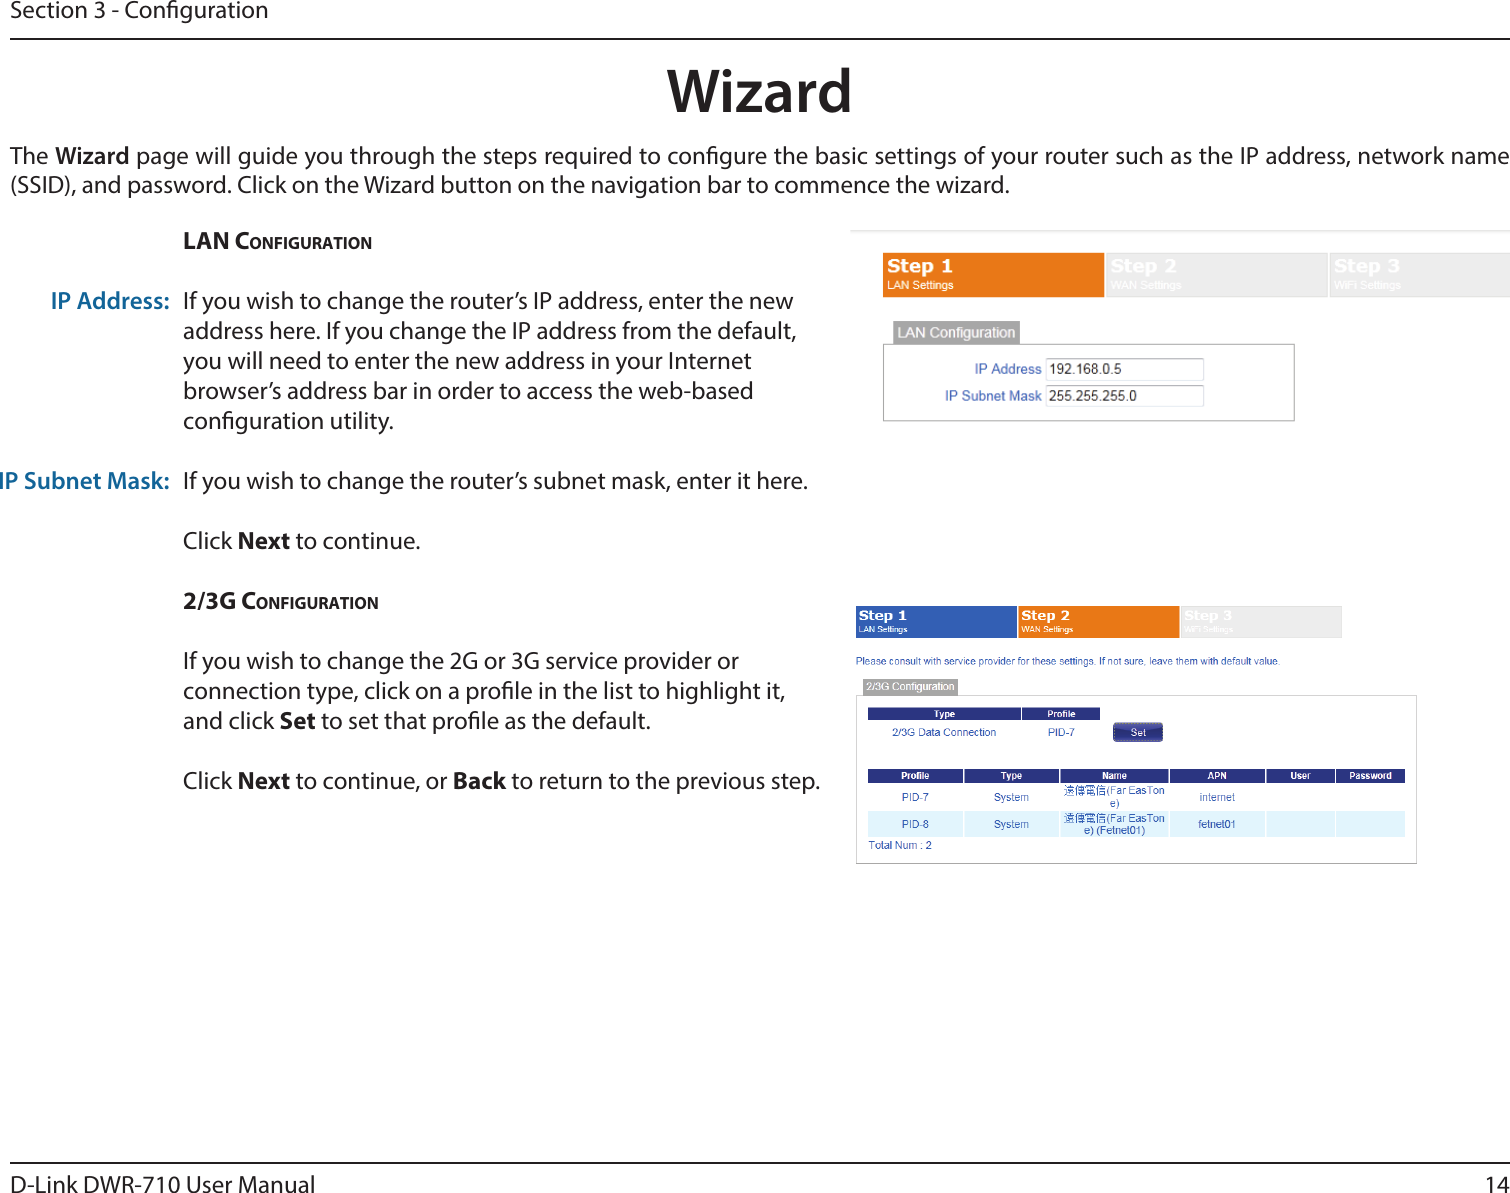 14D-Link DWR-710 User ManualSection 3 - CongurationWizardThe Wizard page will guide you through the steps required to congure the basic settings of your router such as the IP address, network name (SSID), and password. Click on the Wizard button on the navigation bar to commence the wizard.  LAN CoNfigurAtioNIf you wish to change the router’s IP address, enter the new address here. If you change the IP address from the default, you will need to enter the new address in your Internet browser’s address bar in order to access the web-based conguration utility.If you wish to change the router’s subnet mask, enter it here. Click Next to continue. 2/3g CoNfigurAtioNIf you wish to change the 2G or 3G service provider or connection type, click on a prole in the list to highlight it, and click Set to set that prole as the default. Click Next to continue, or Back to return to the previous step.IP Address:IP Subnet Mask: